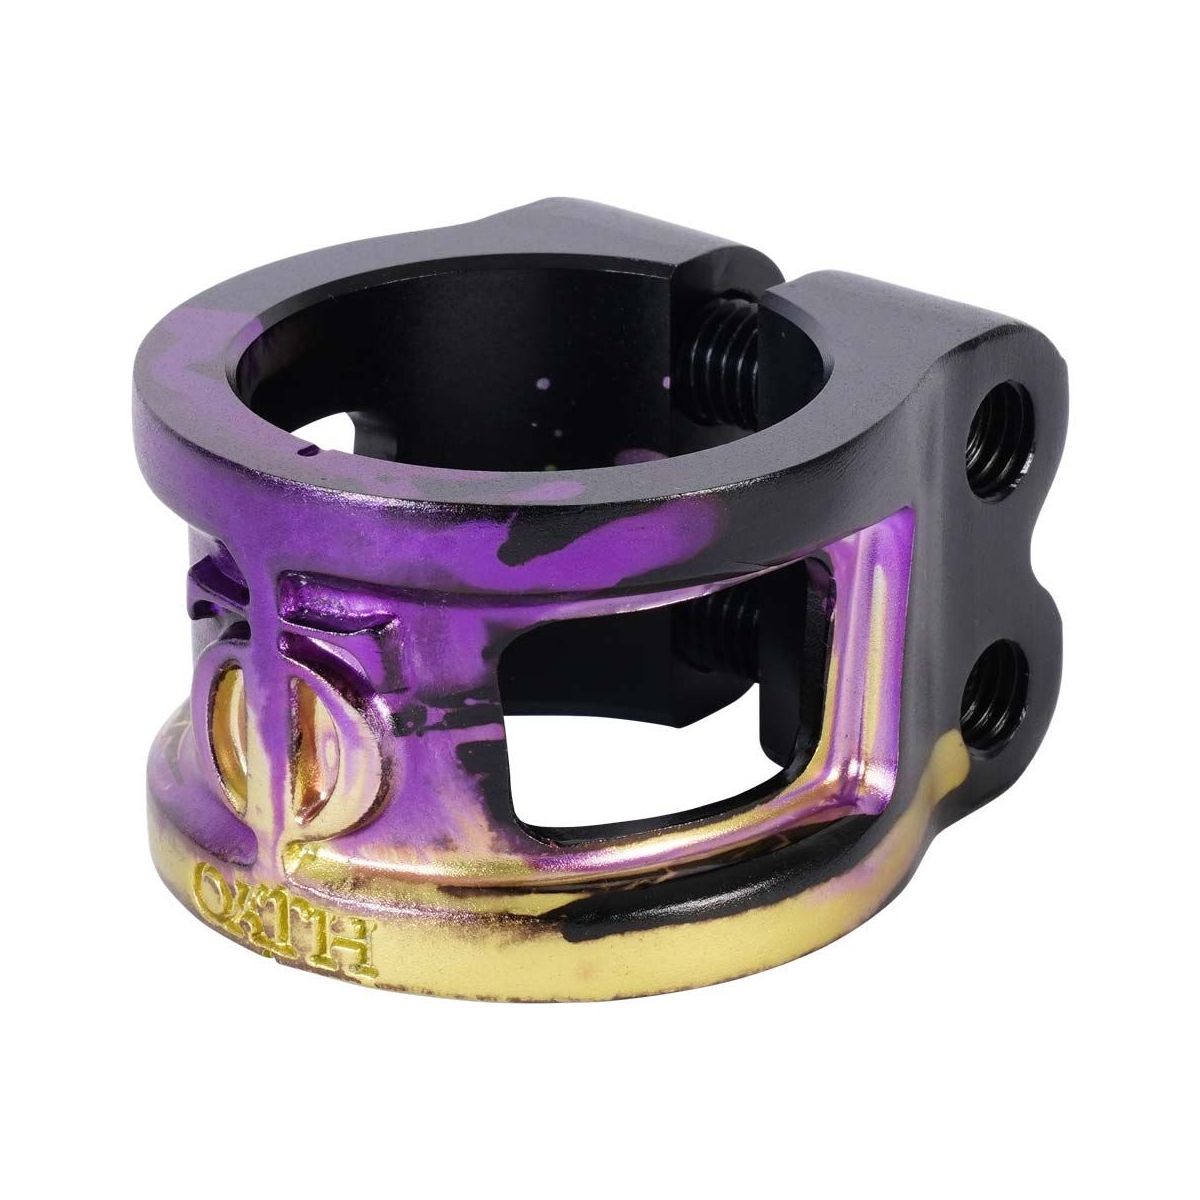 Zacisk Oath Cage Double v2 Black / Purple / Yellow